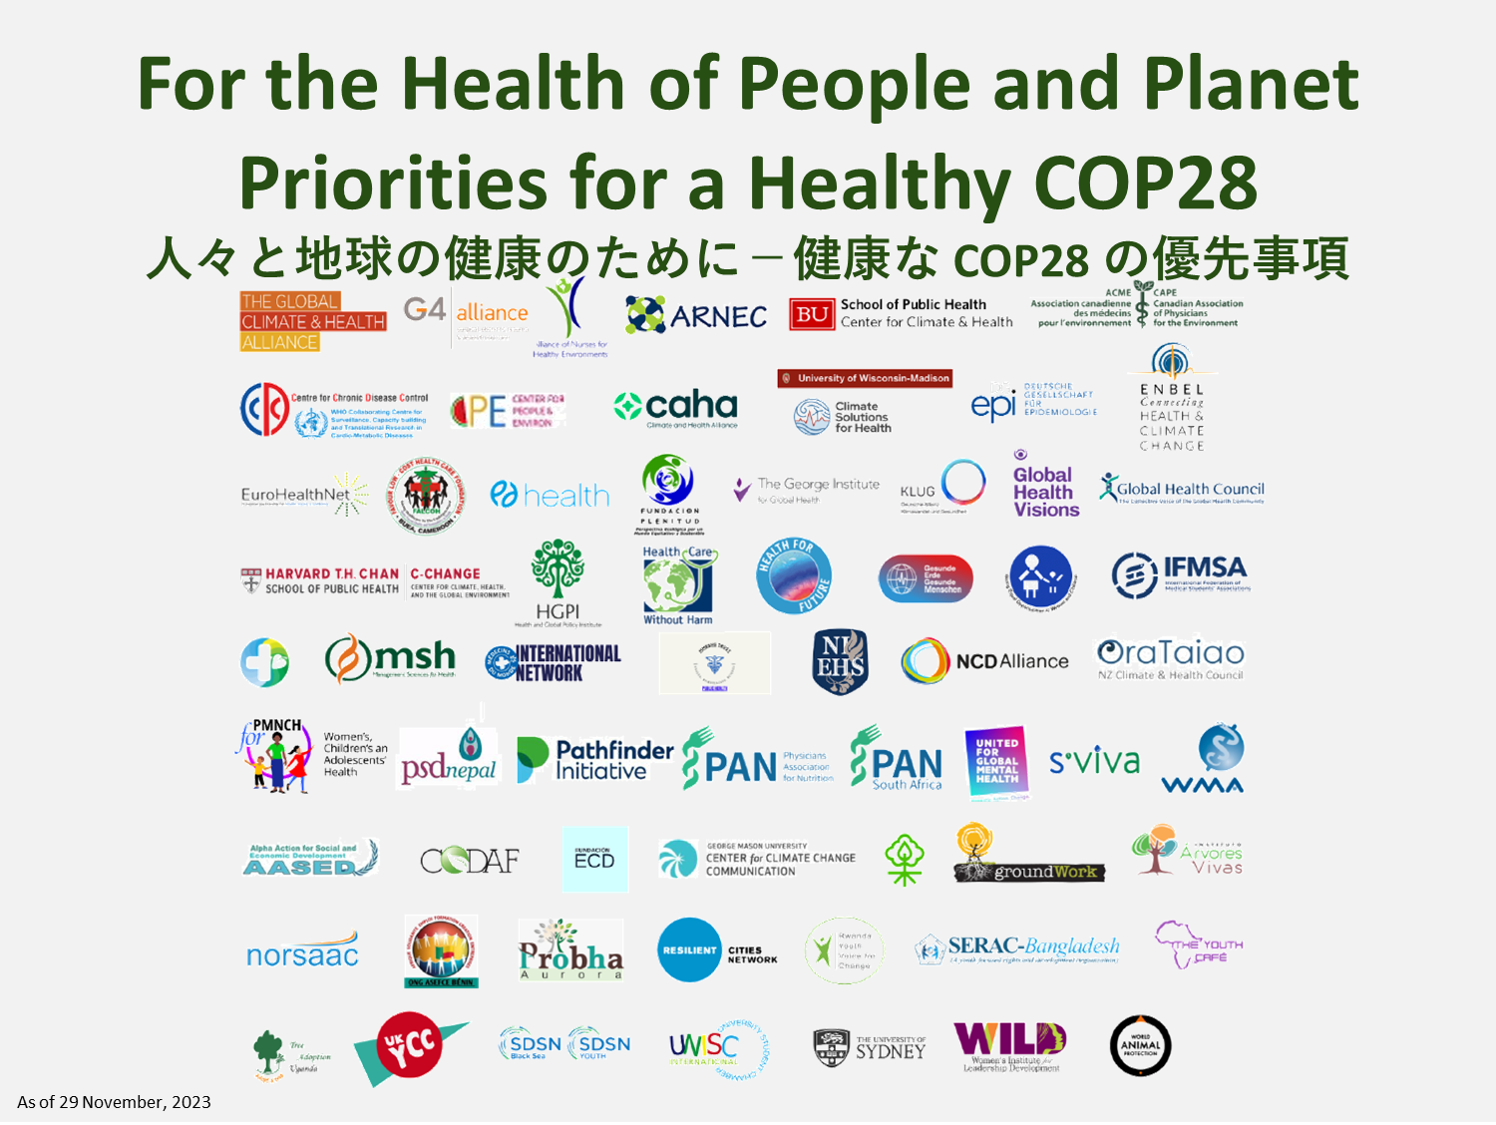 [Announcement] HGPI Endorsed “For the Health of People and Planet: Priorities for a Healthy COP28” (November 30, 2023)